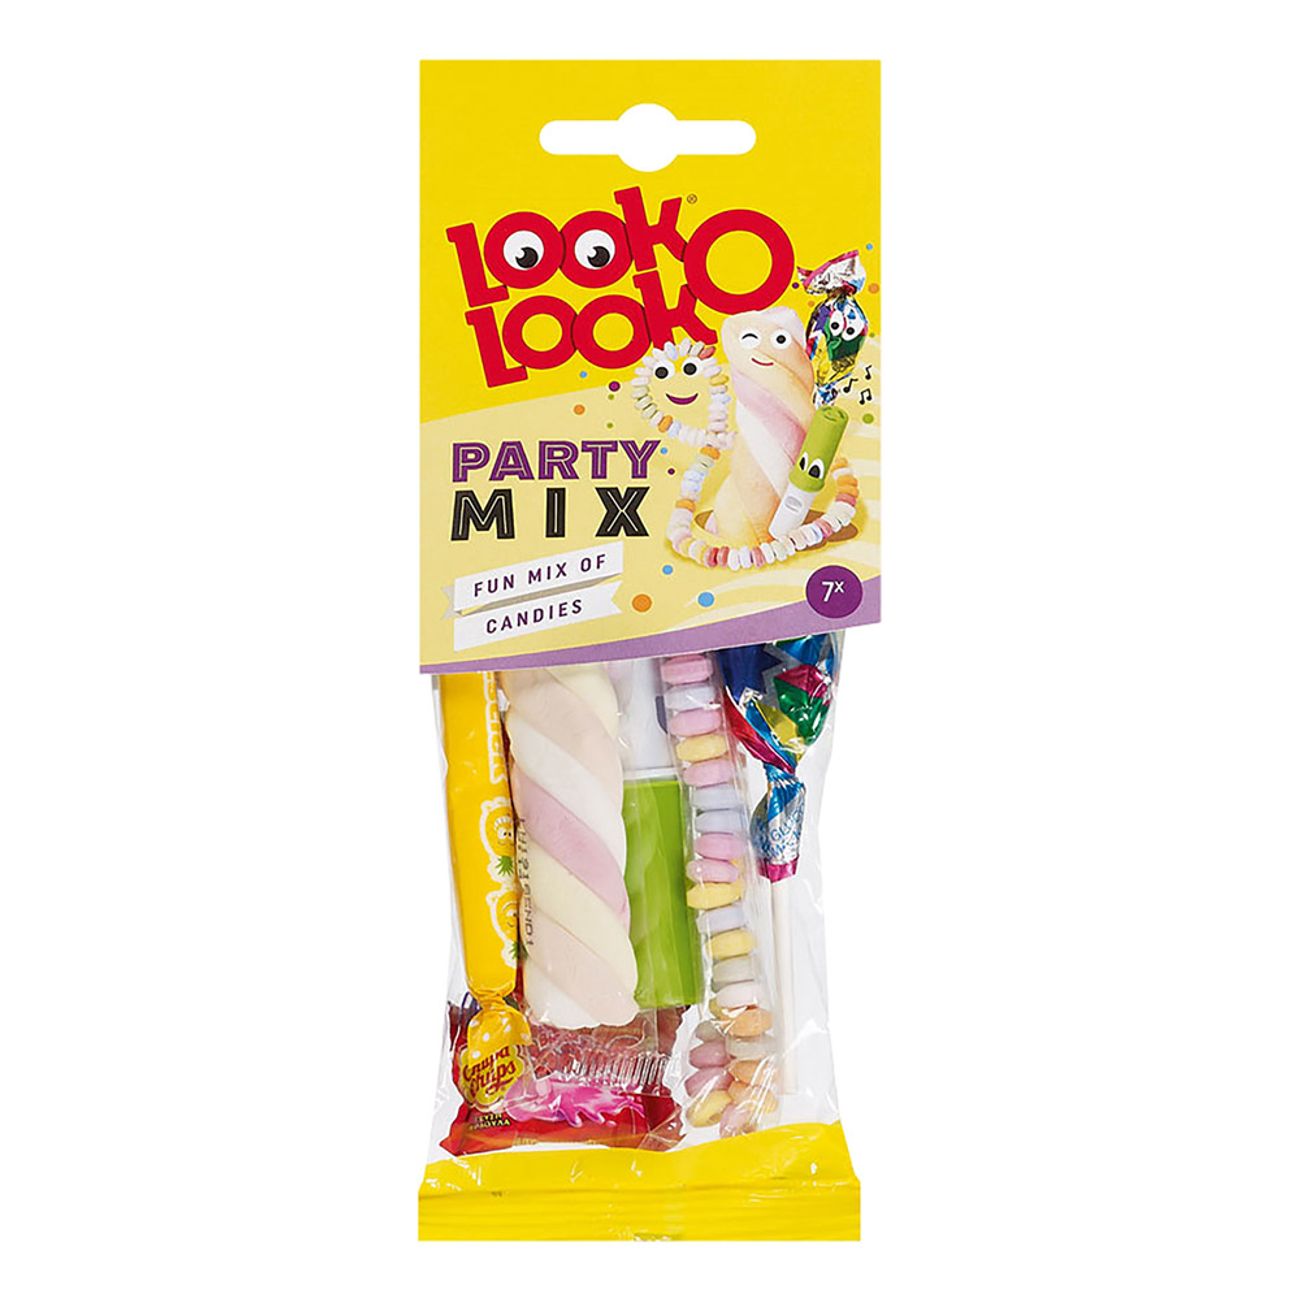 look-o-look-party-mix-1